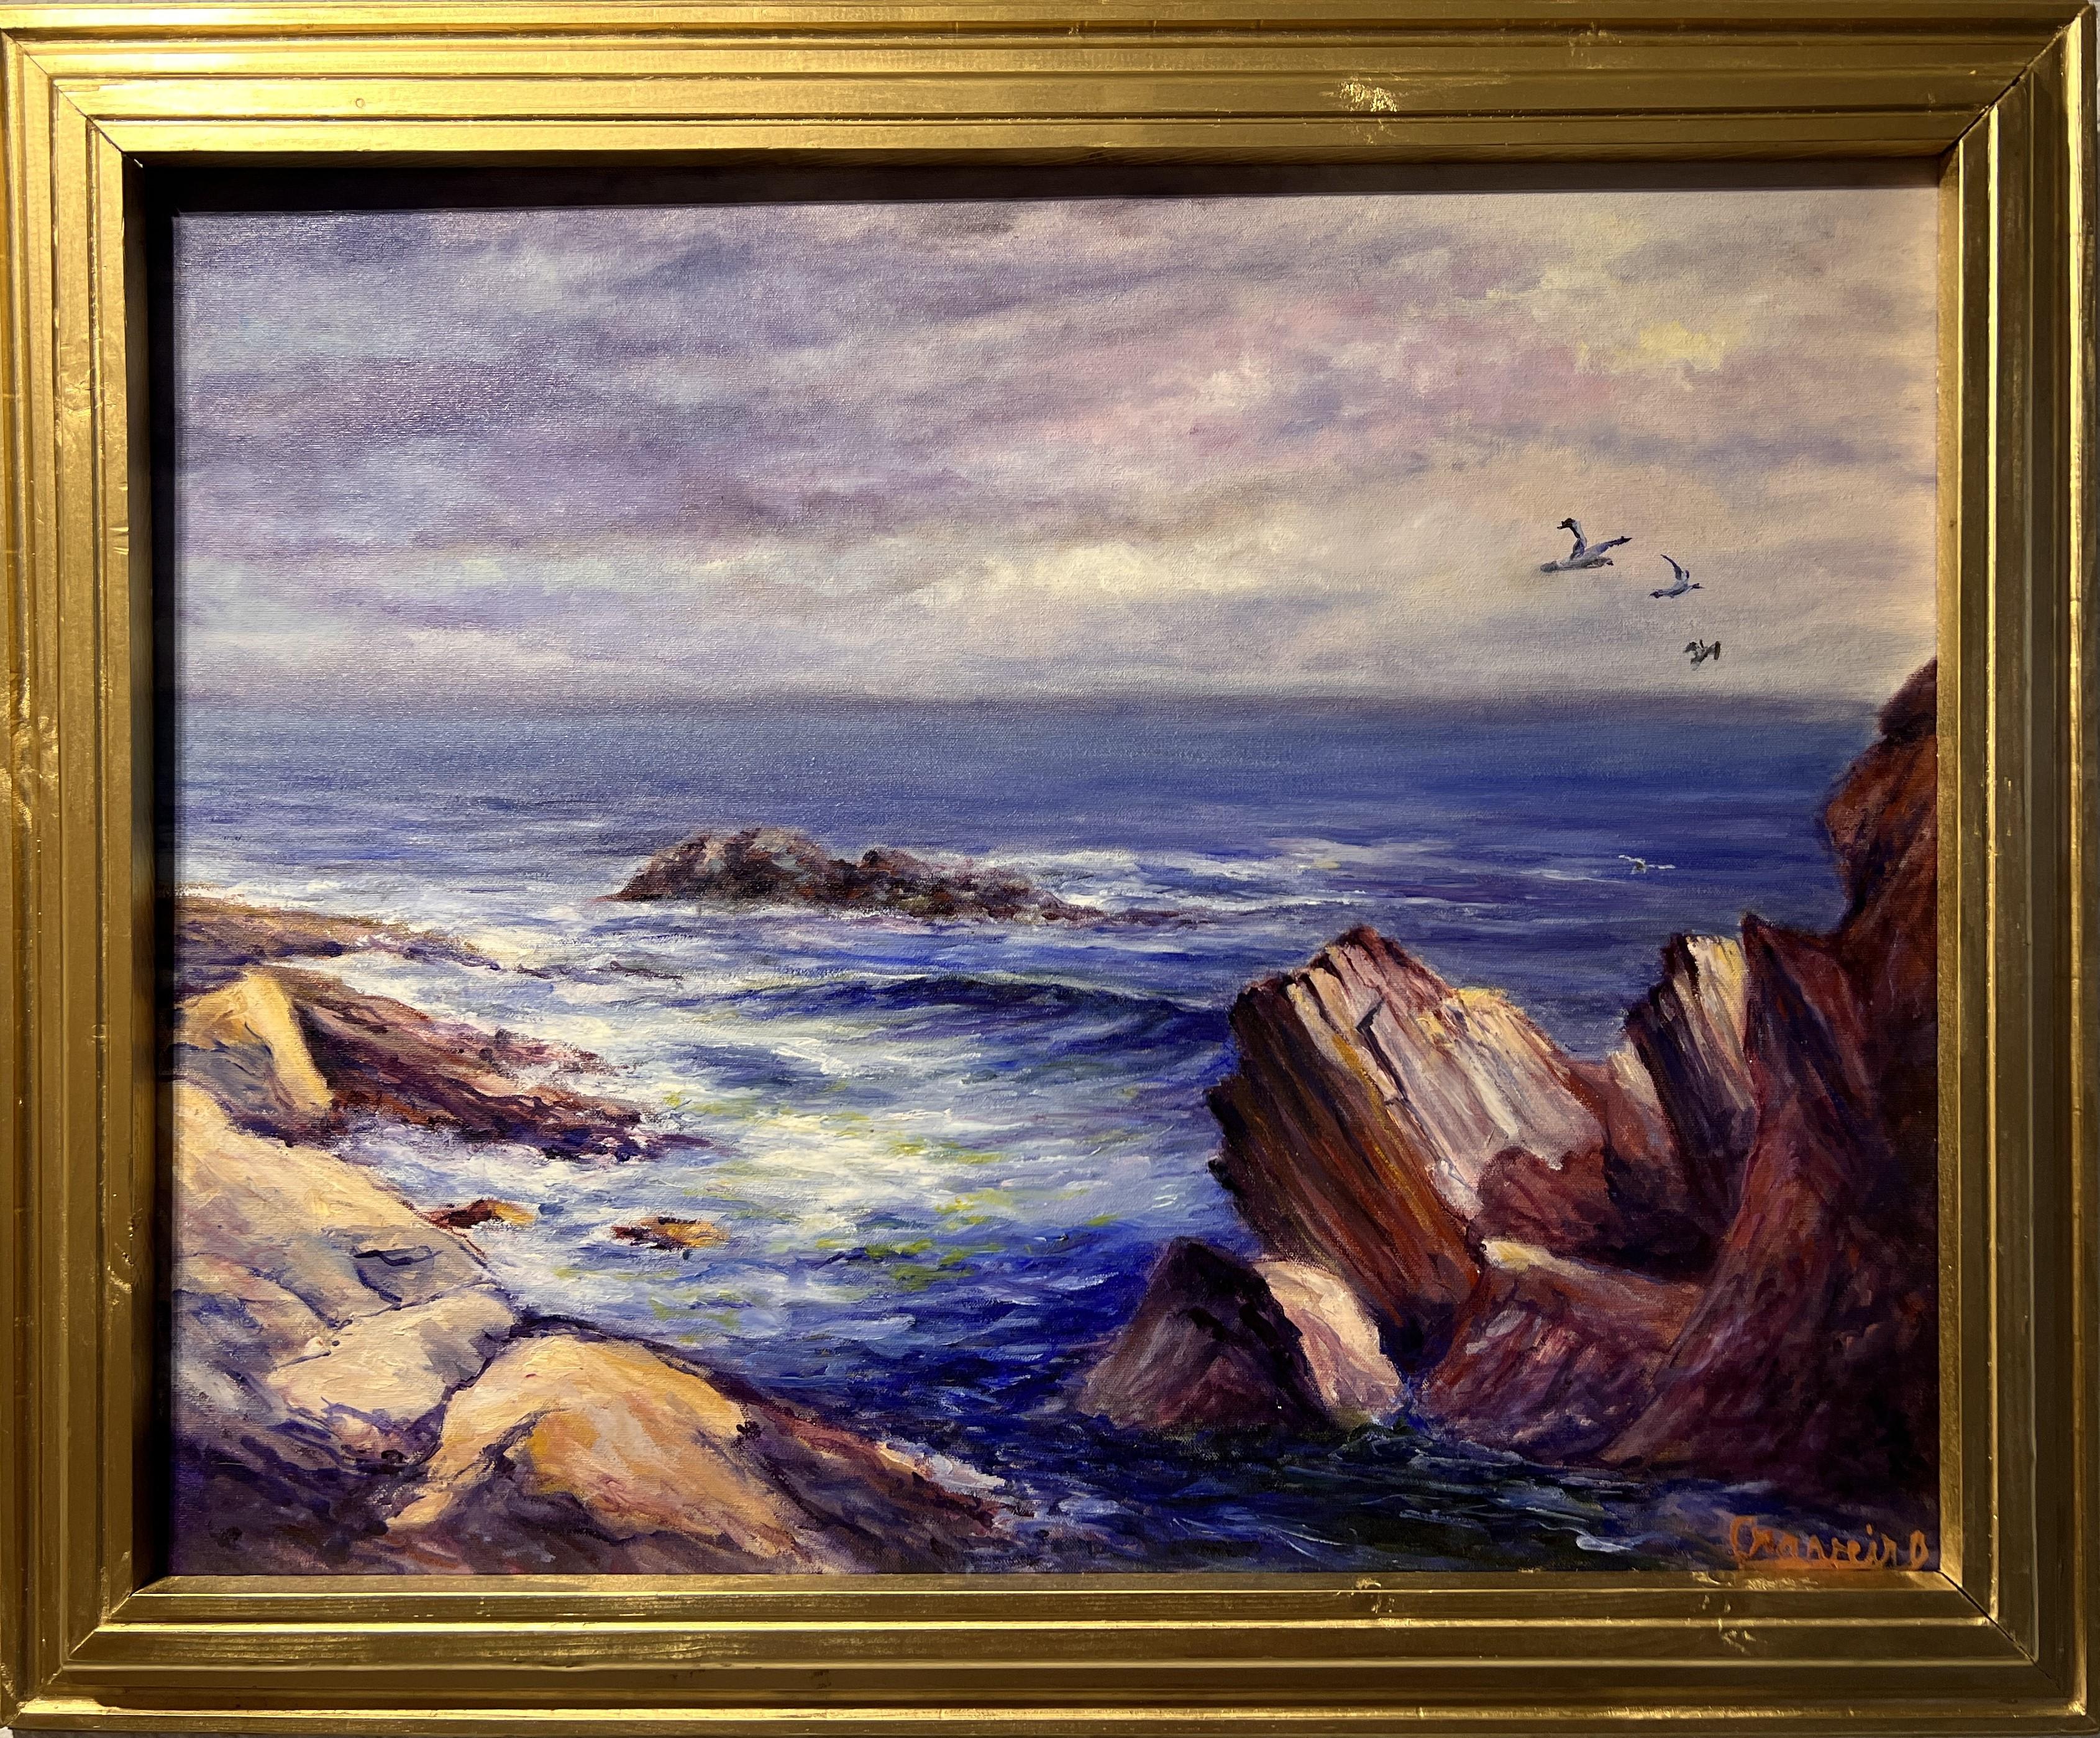 This is an original oil painting on canvas depicting a seascape.

     Framed measuring 36" x 29" & painting measures 30" x 24". Nicely framed.

     The painting is in good condition, the frame has some scuffs and scratches. Please see photos,